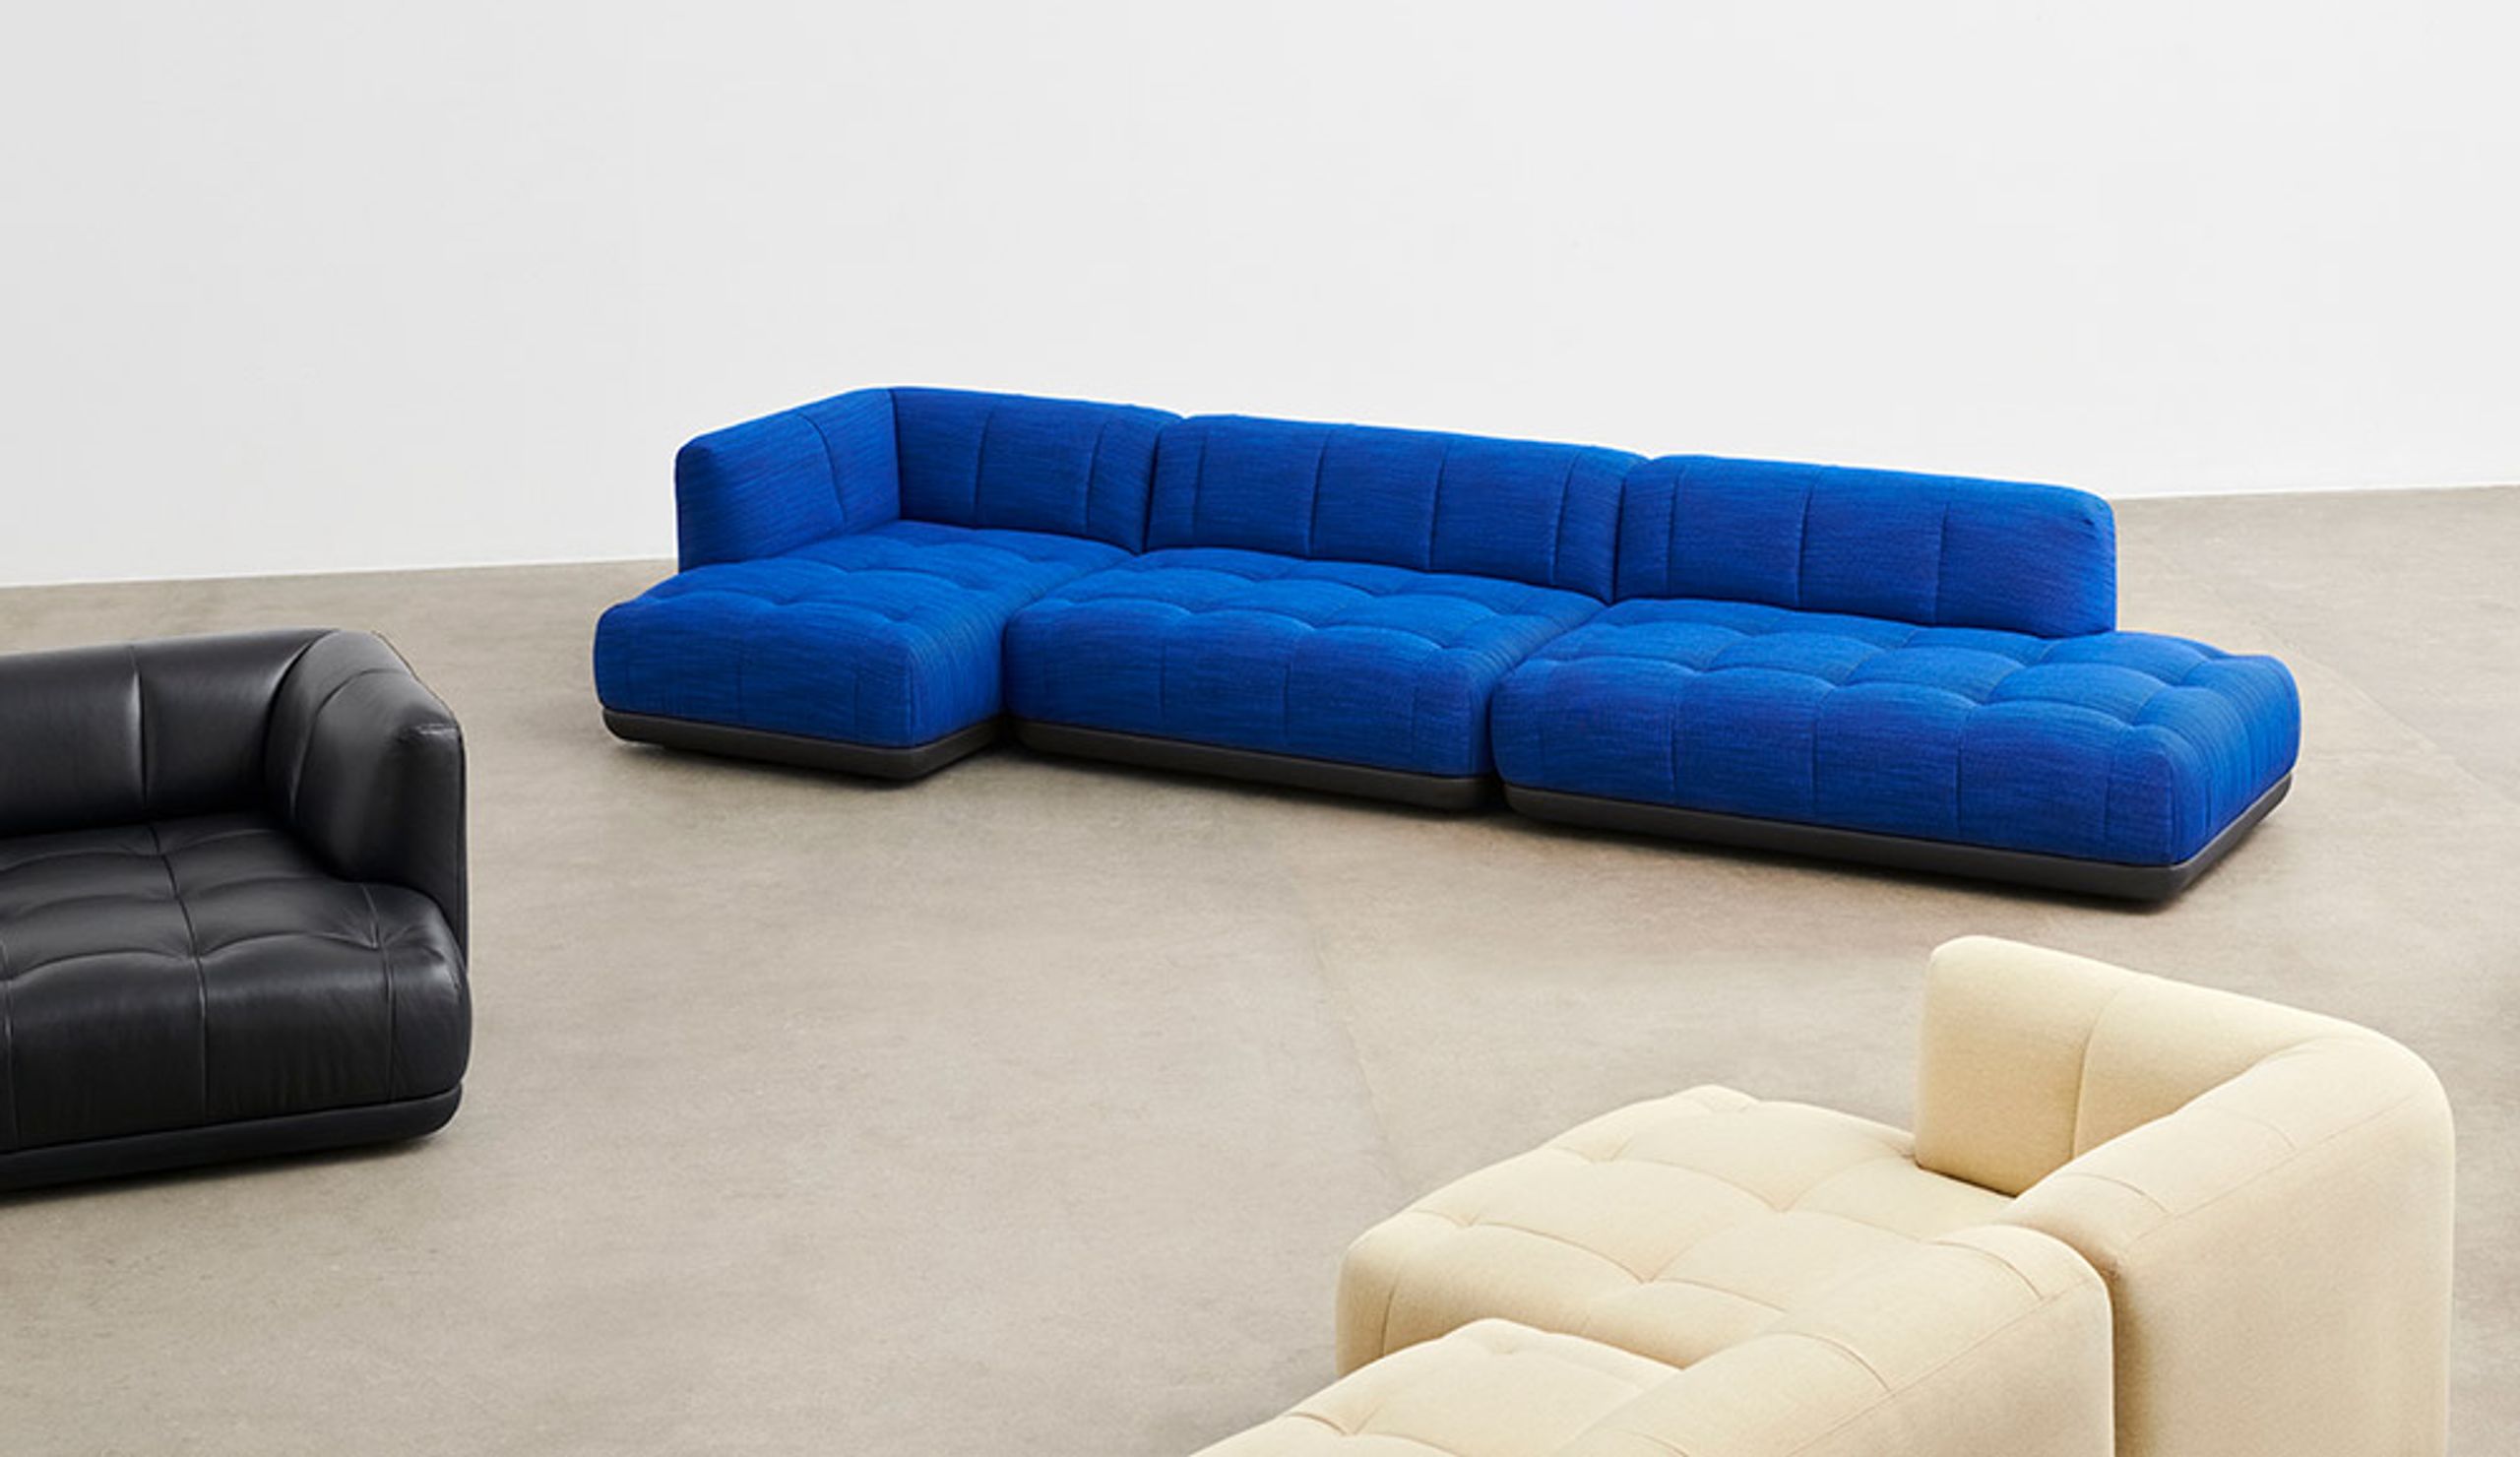 HAY - Sofa - Quilton Collection / Combination 22 - Ruskin 33